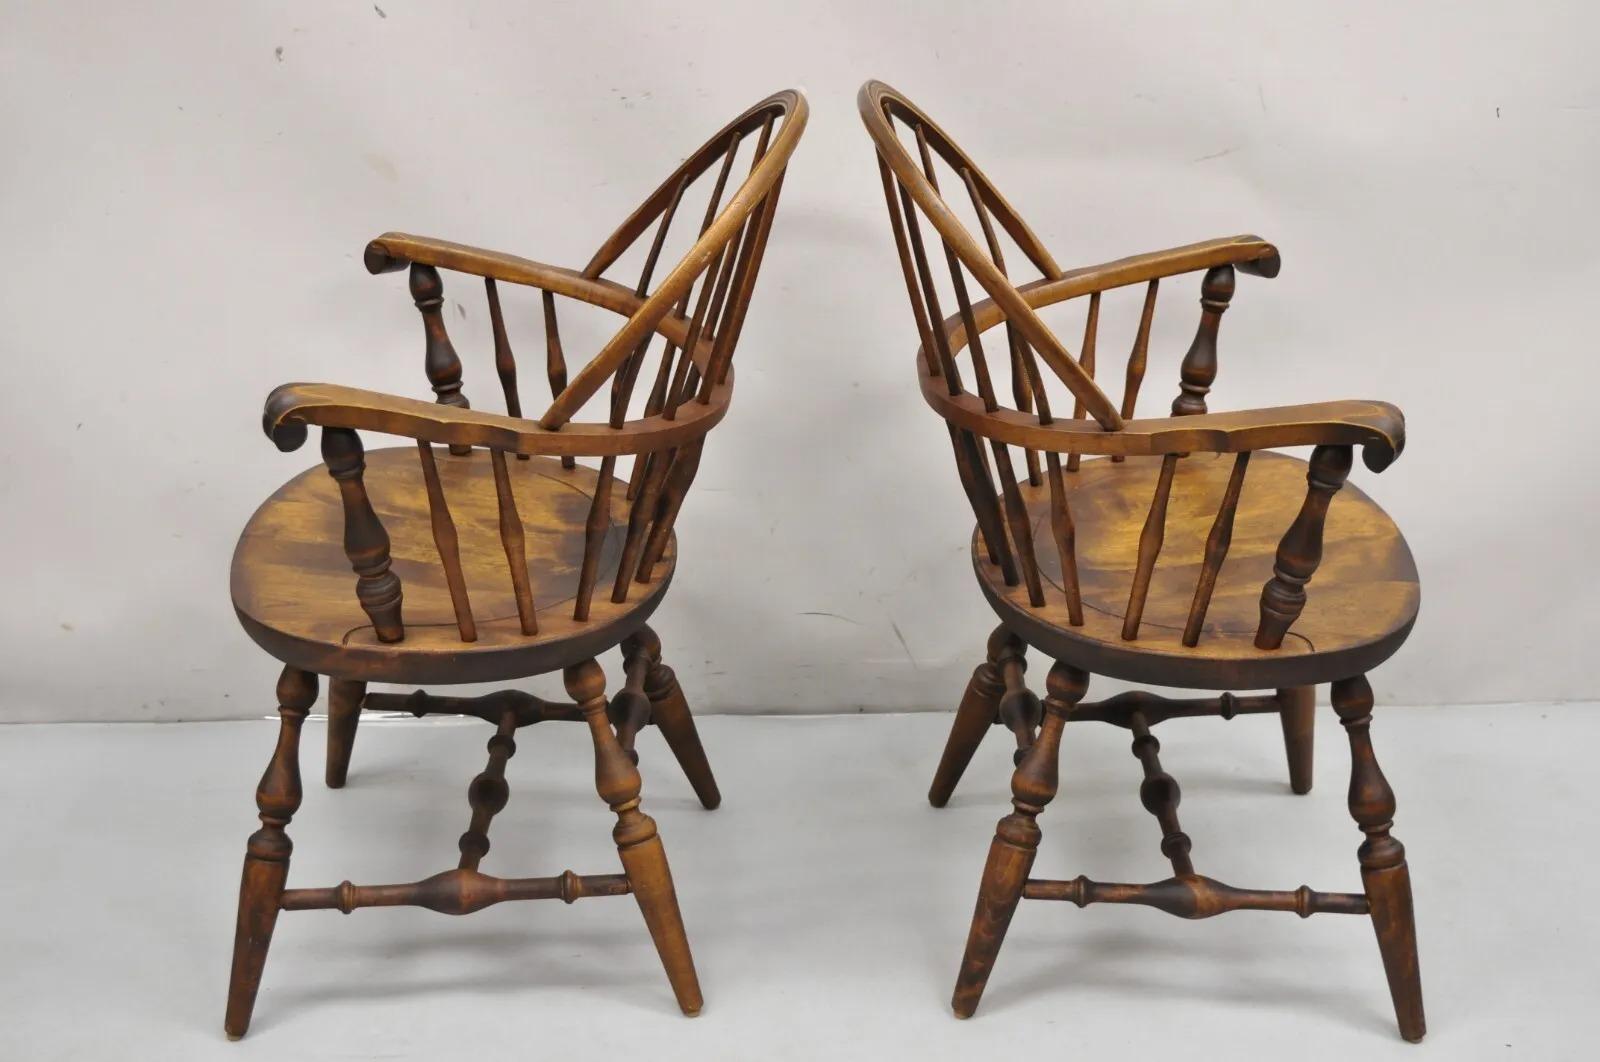 Nichols & Stone Rock Maple Wood Bowback Colonial Windsor Arm Chairs - a Pair For Sale 3